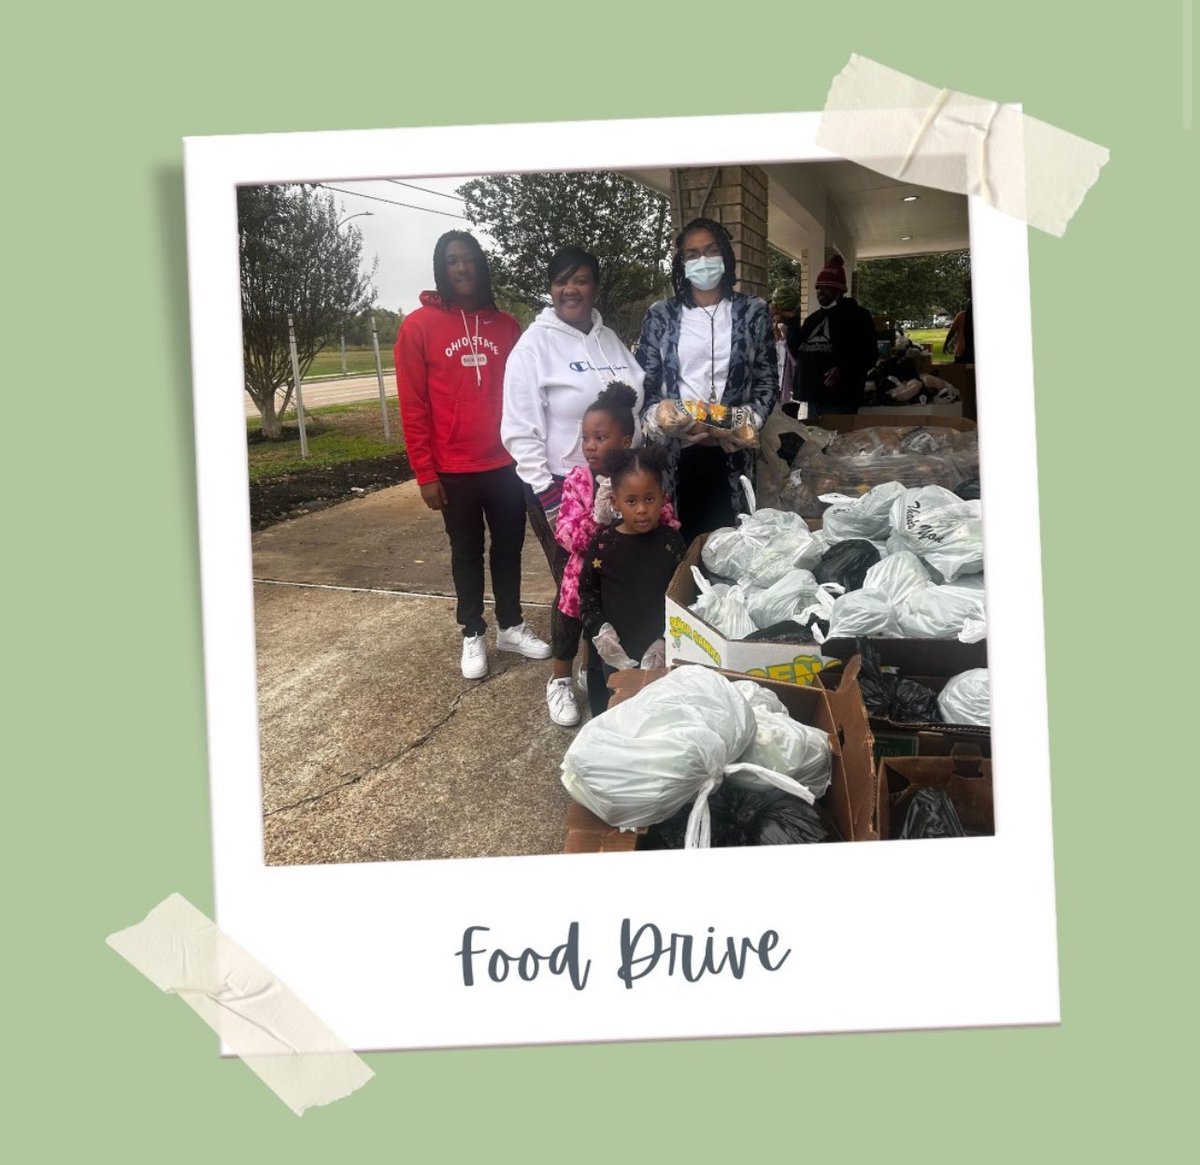 Last Saturday, our fellow Ny Elle Blount-Yoshikawa attended The AliefCare food drive.
She stated 'This event opened my eyes. It showed me how to better help and, what to focus on. I saw the number of hurt families and it made me more passionate to work.'